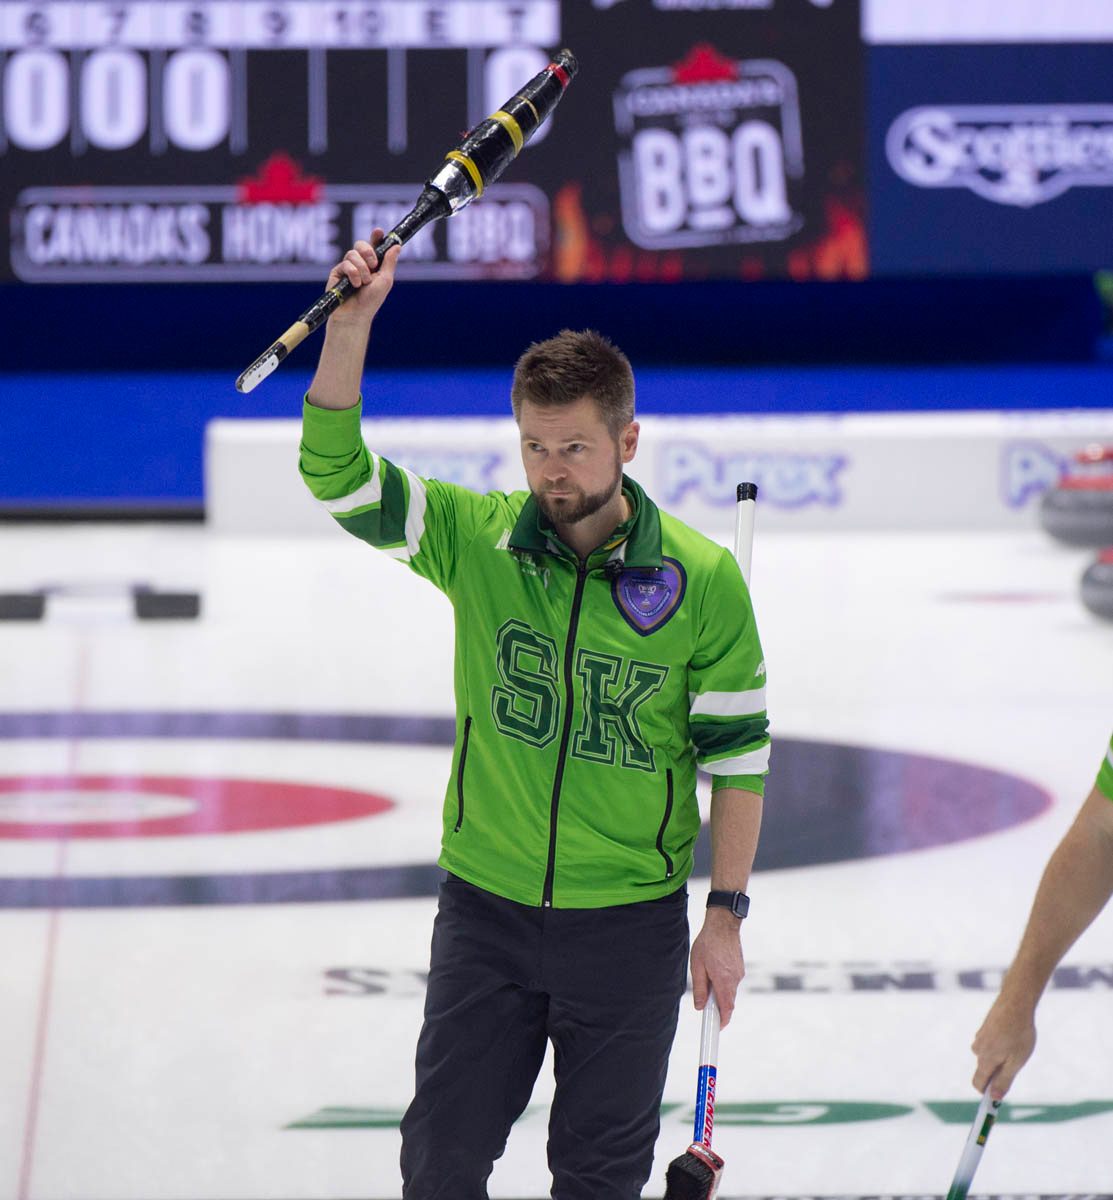 MCEWEN AND DUNSTONE TO FACE OFF IN 3V4 PAGE PLAYOFF